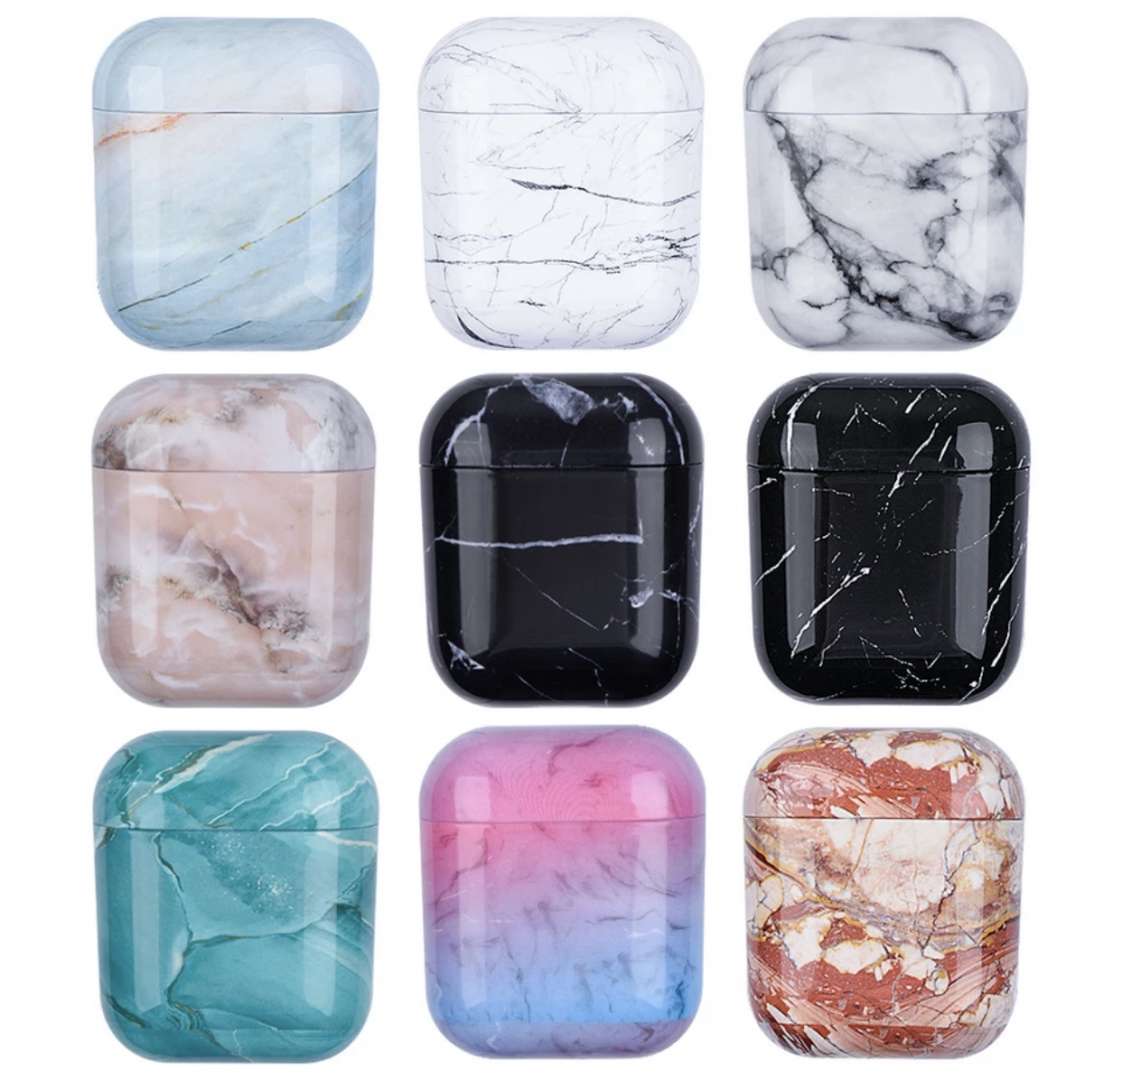 New Airpods cover marble new !!!! There's also a Pro iPod!